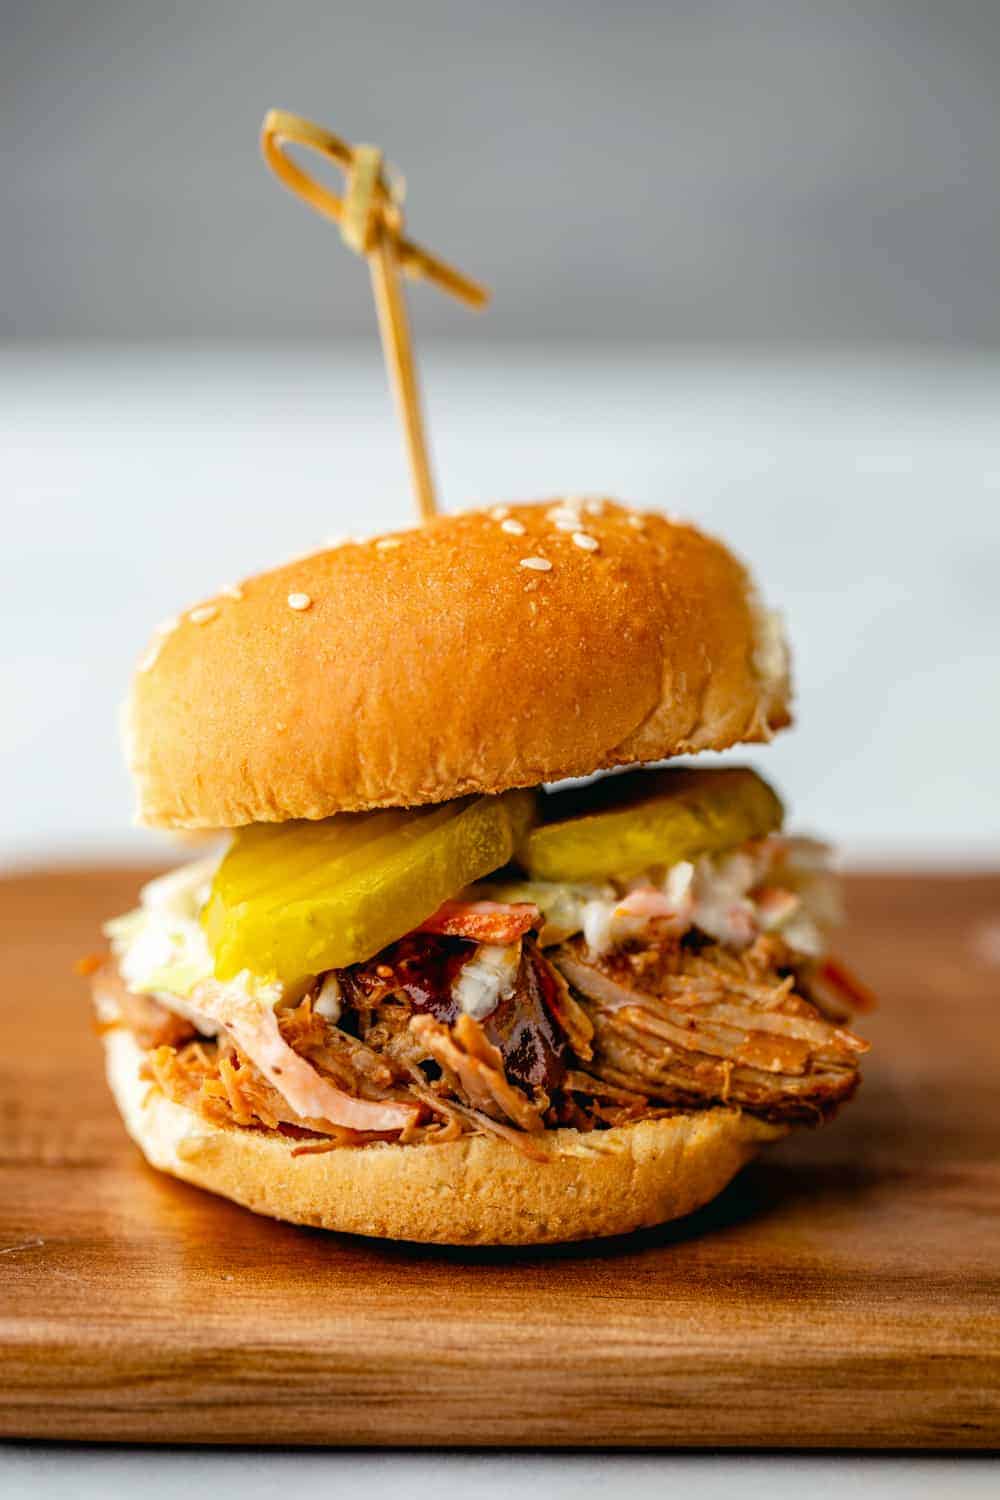 Instant Pot Pulled Pork is so fast and easy, you'll never make it another way again.